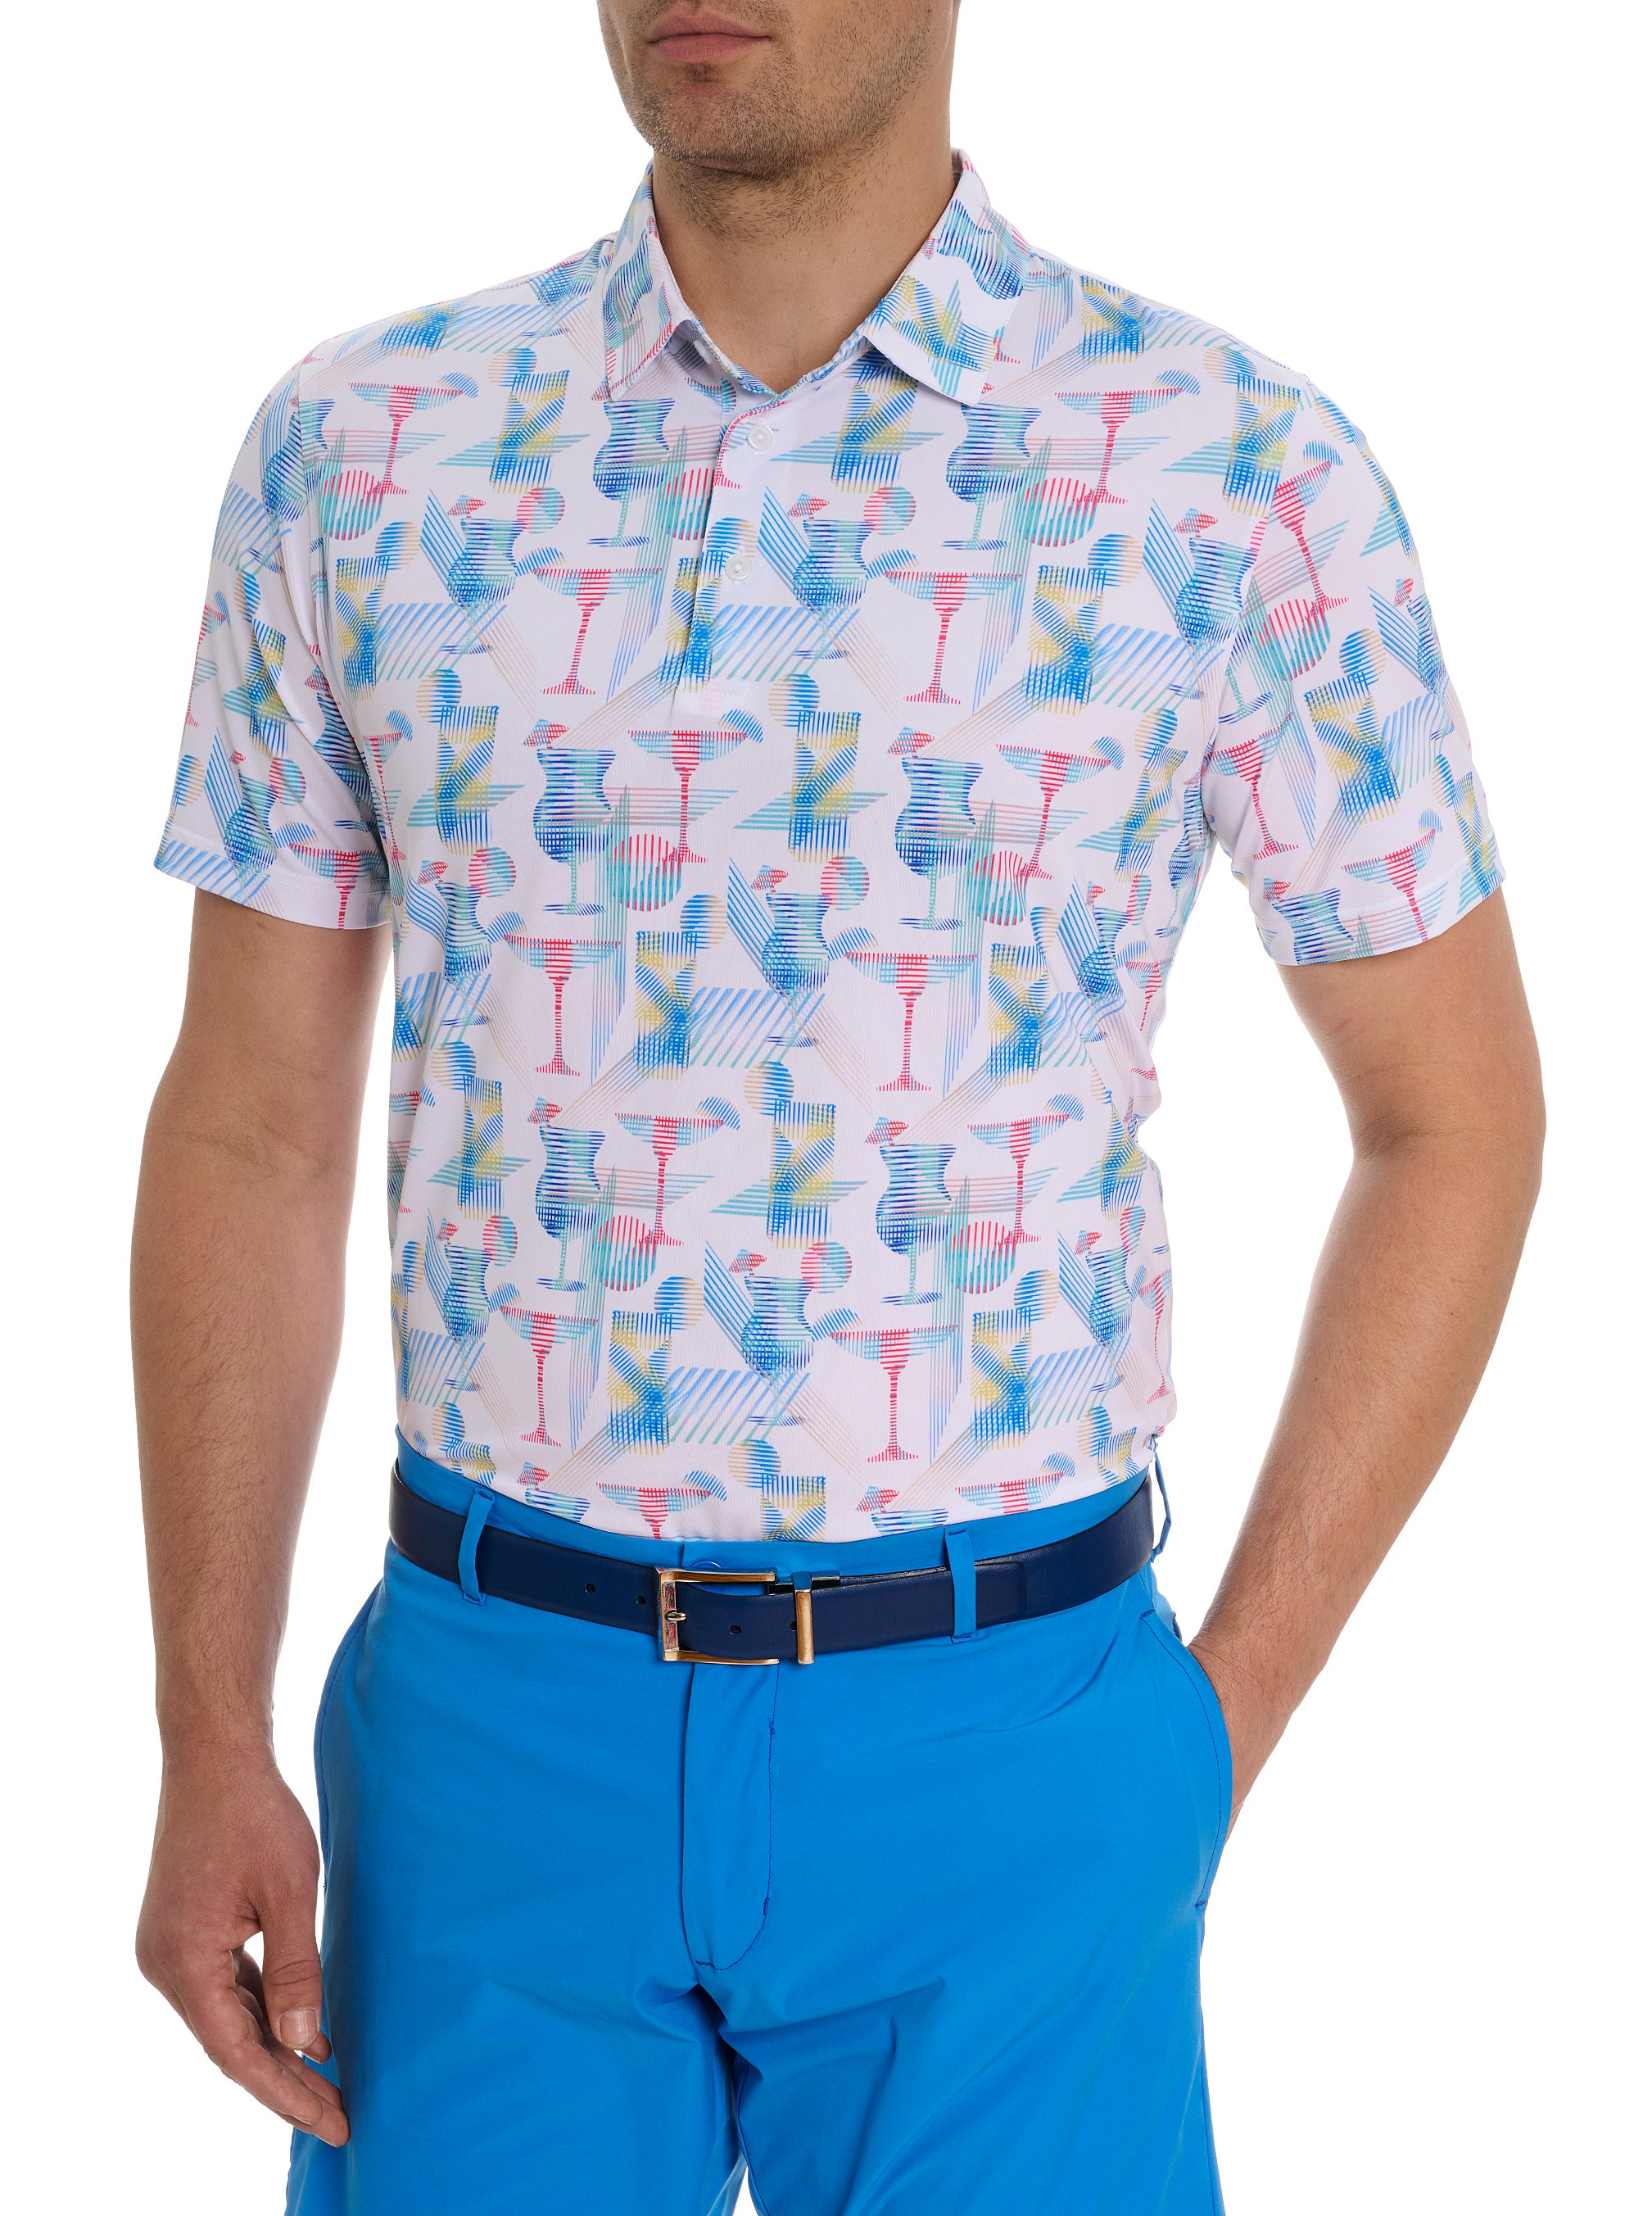 Robert Graham Clubhouse Happiest Hour Knit Polo